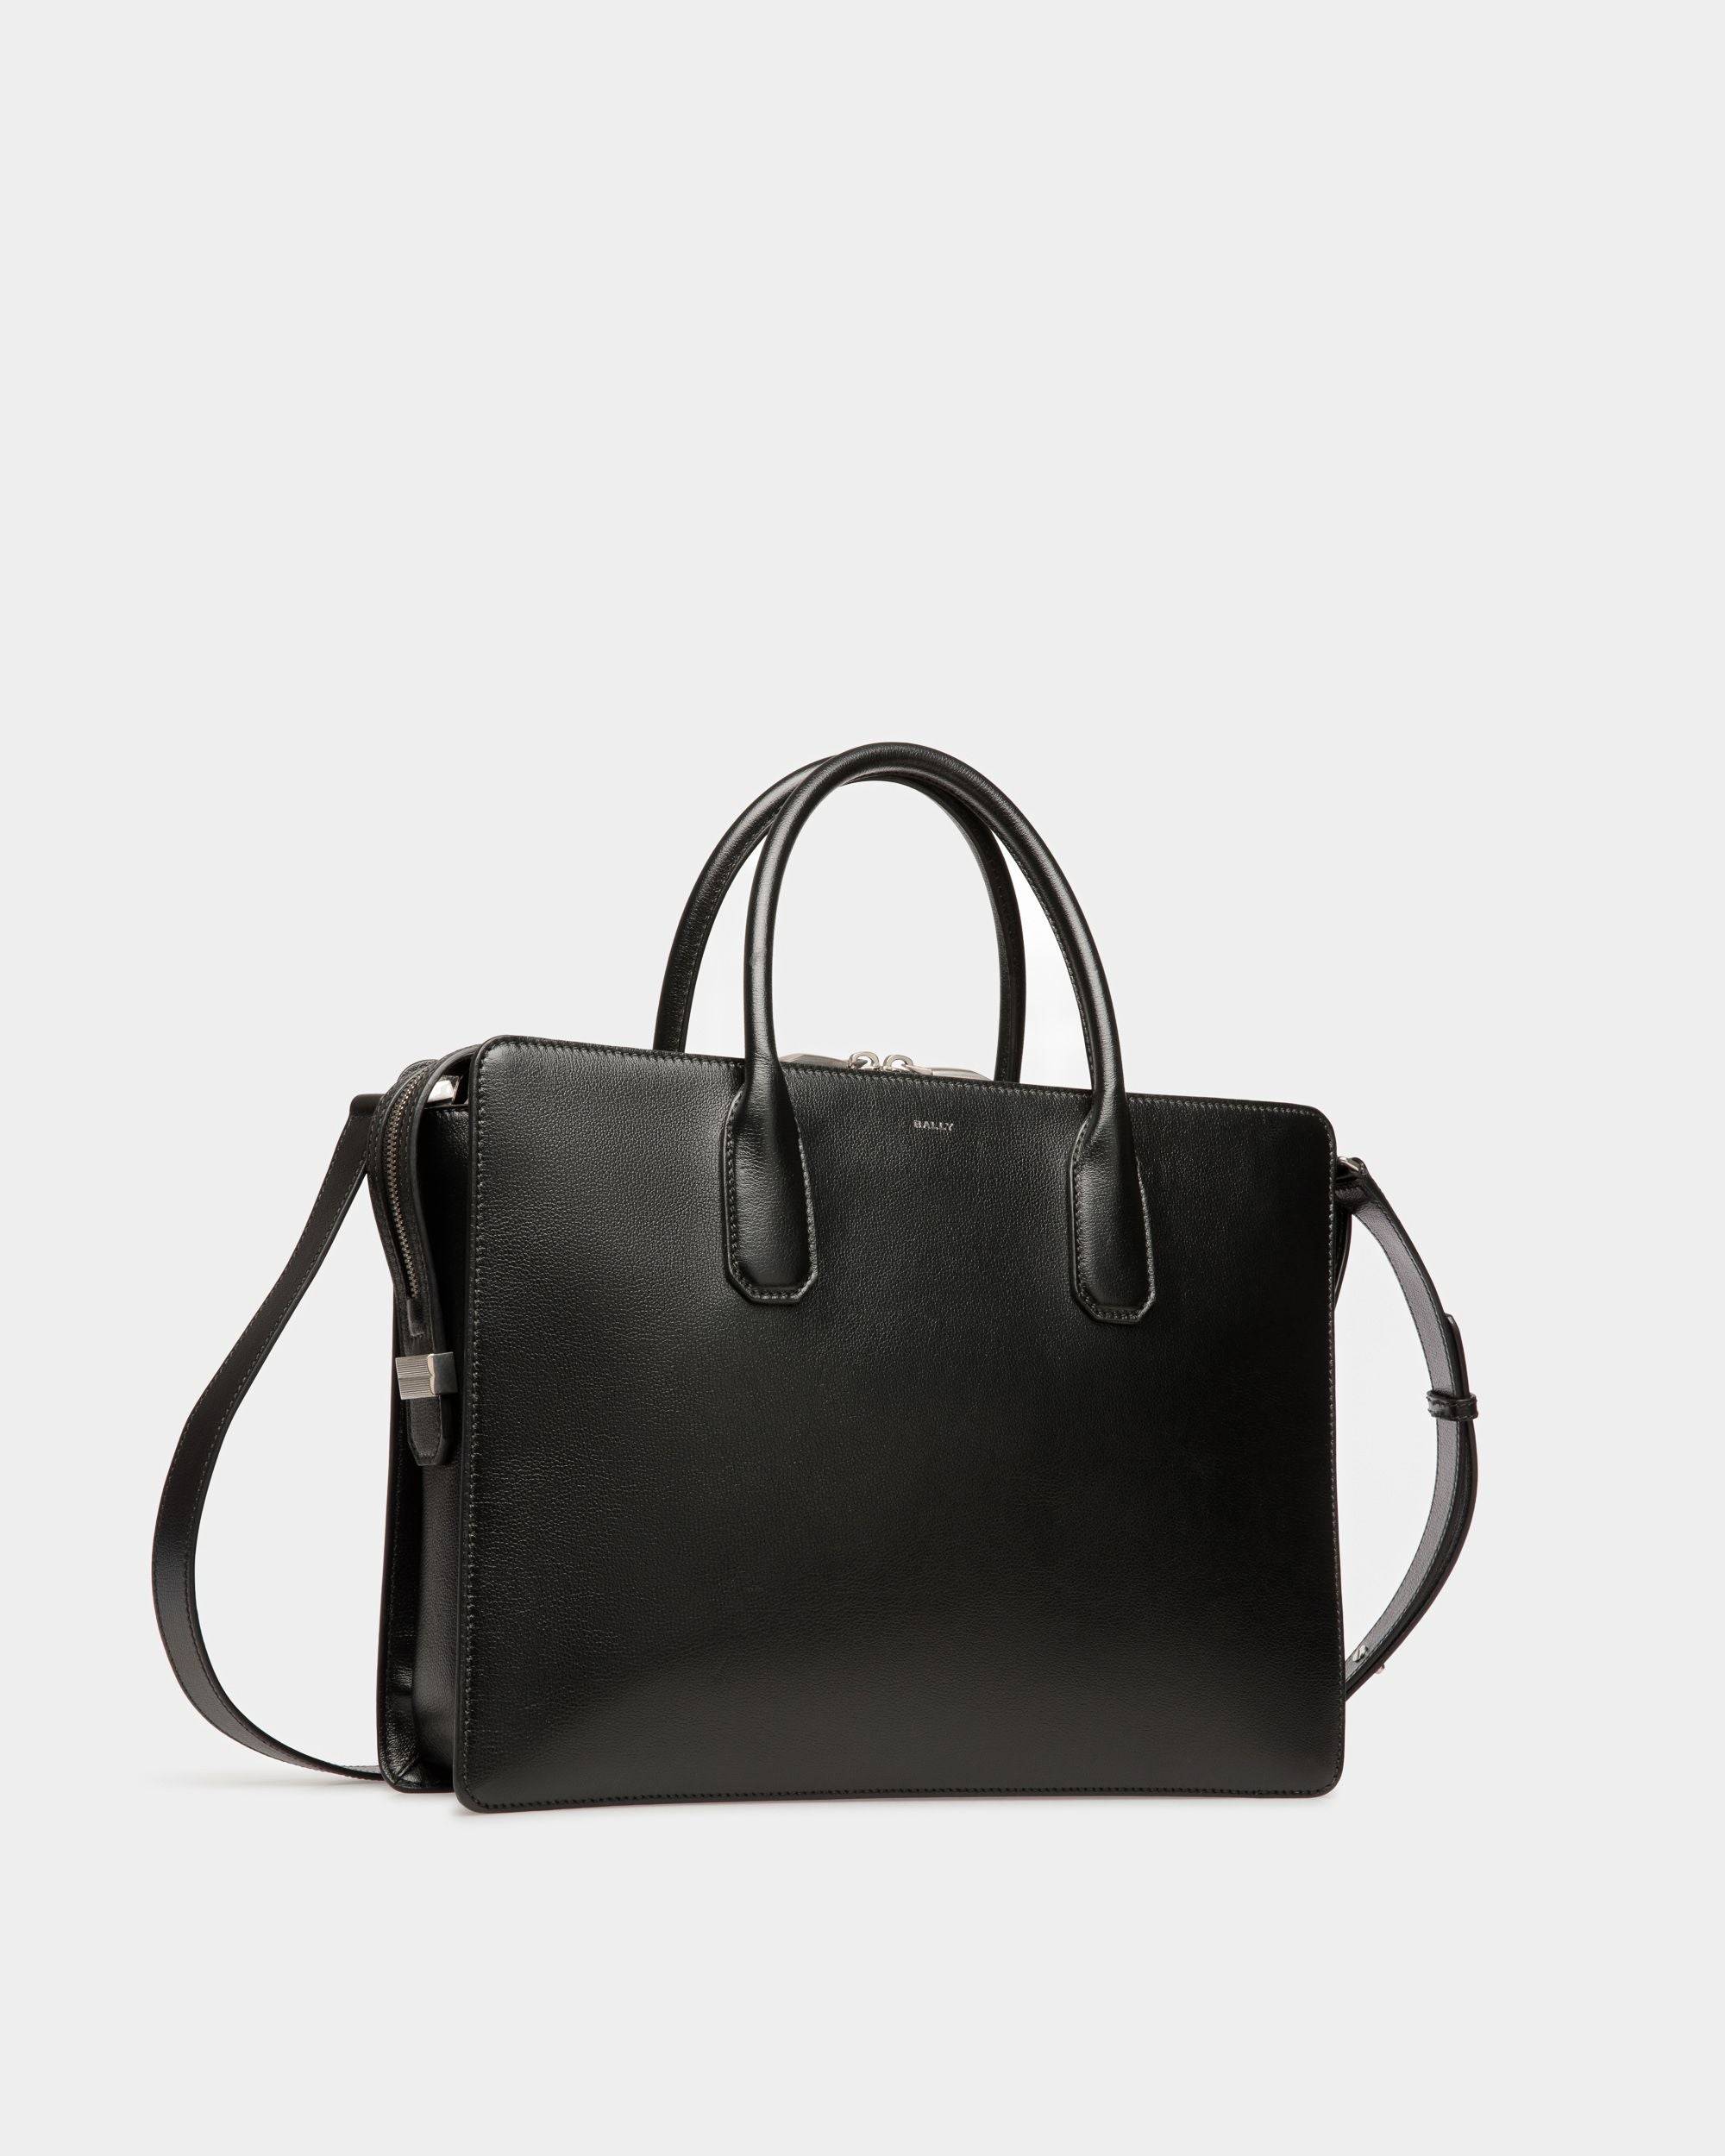 Busy | Men's Business Bag | Black Leather | Bally | Still Life 3/4 Front